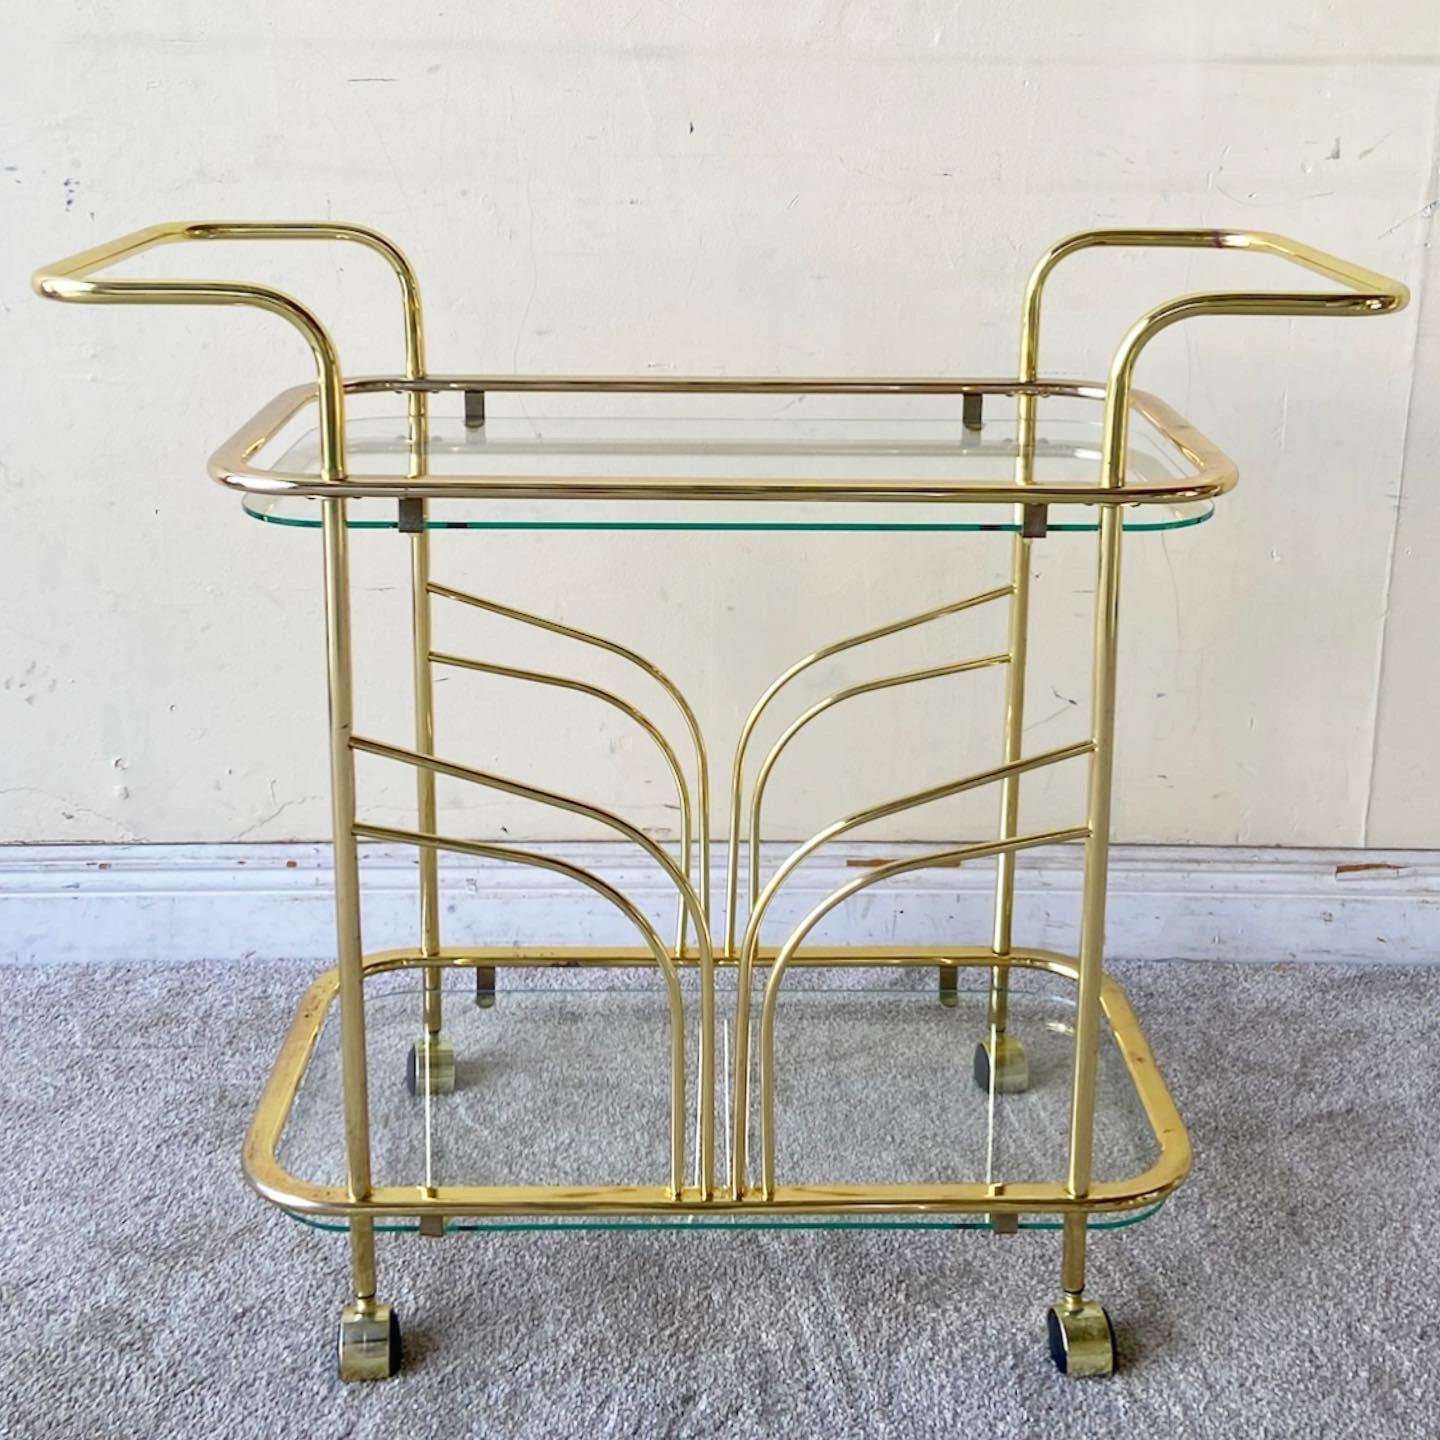 Amazing vintage Hollywood regency two tier bar cart. Features a fantastic gold finish with glass shelves.